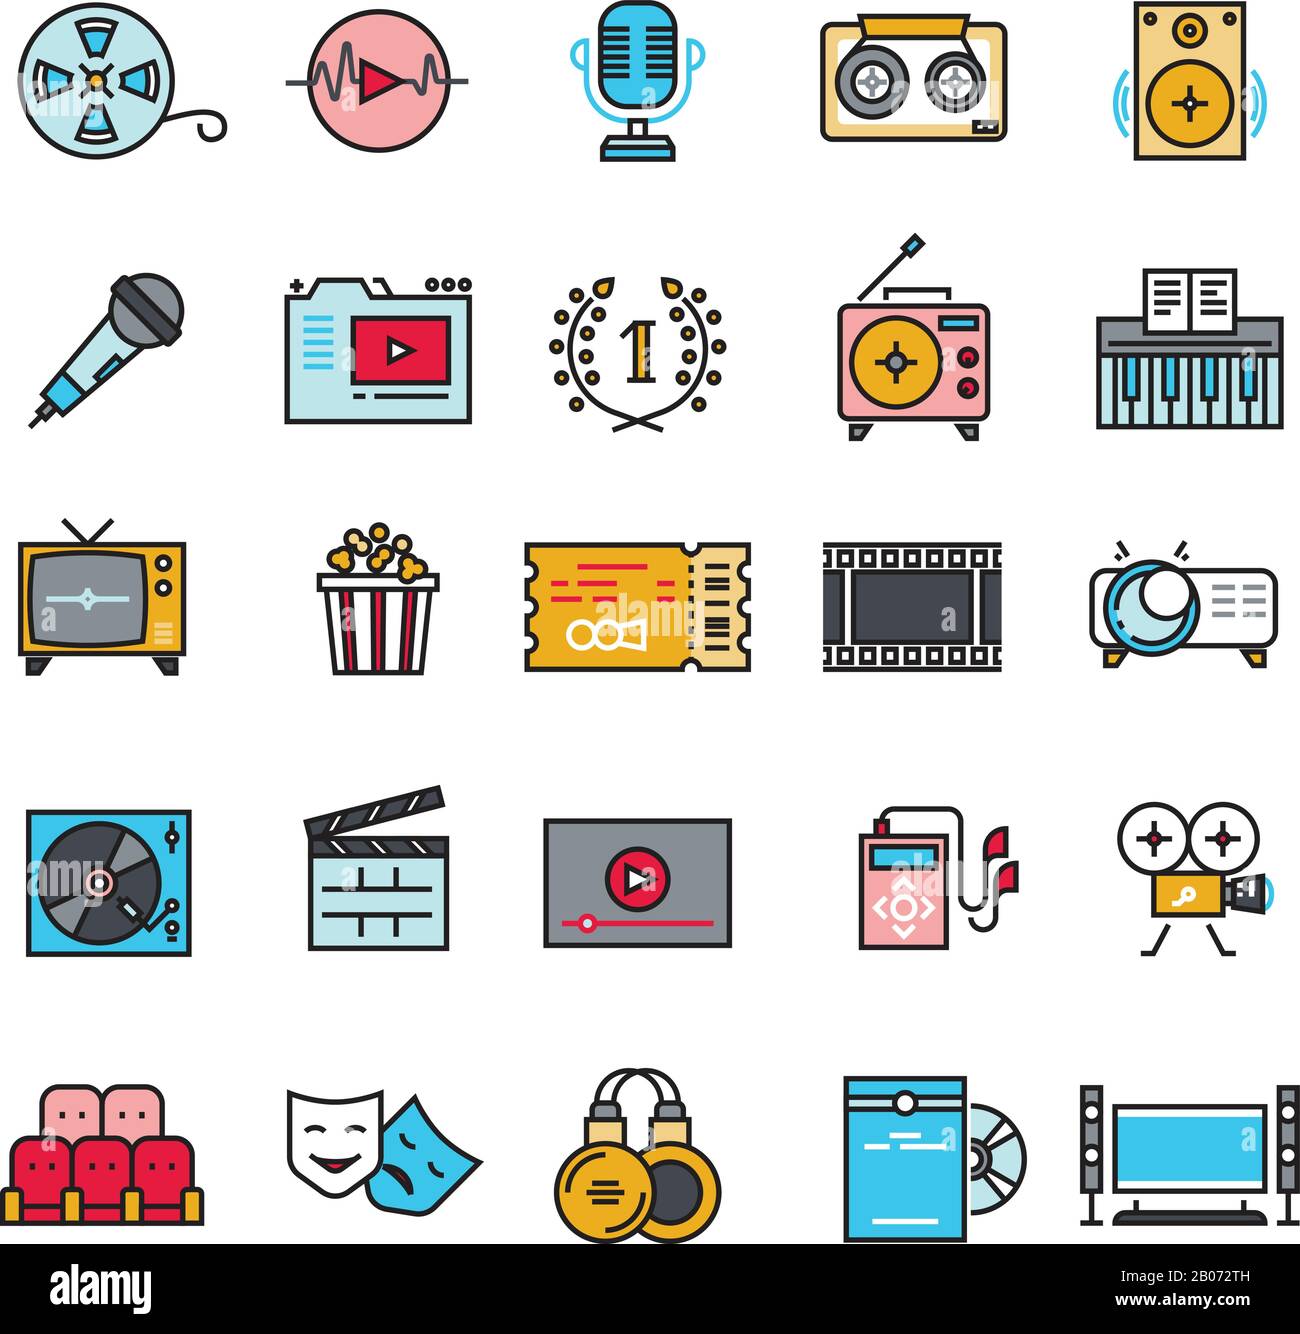 Multimedia sound audio music radio video thin line vector icons with flat elements. Media player and cinema, movie and headphone illustration Stock Vector